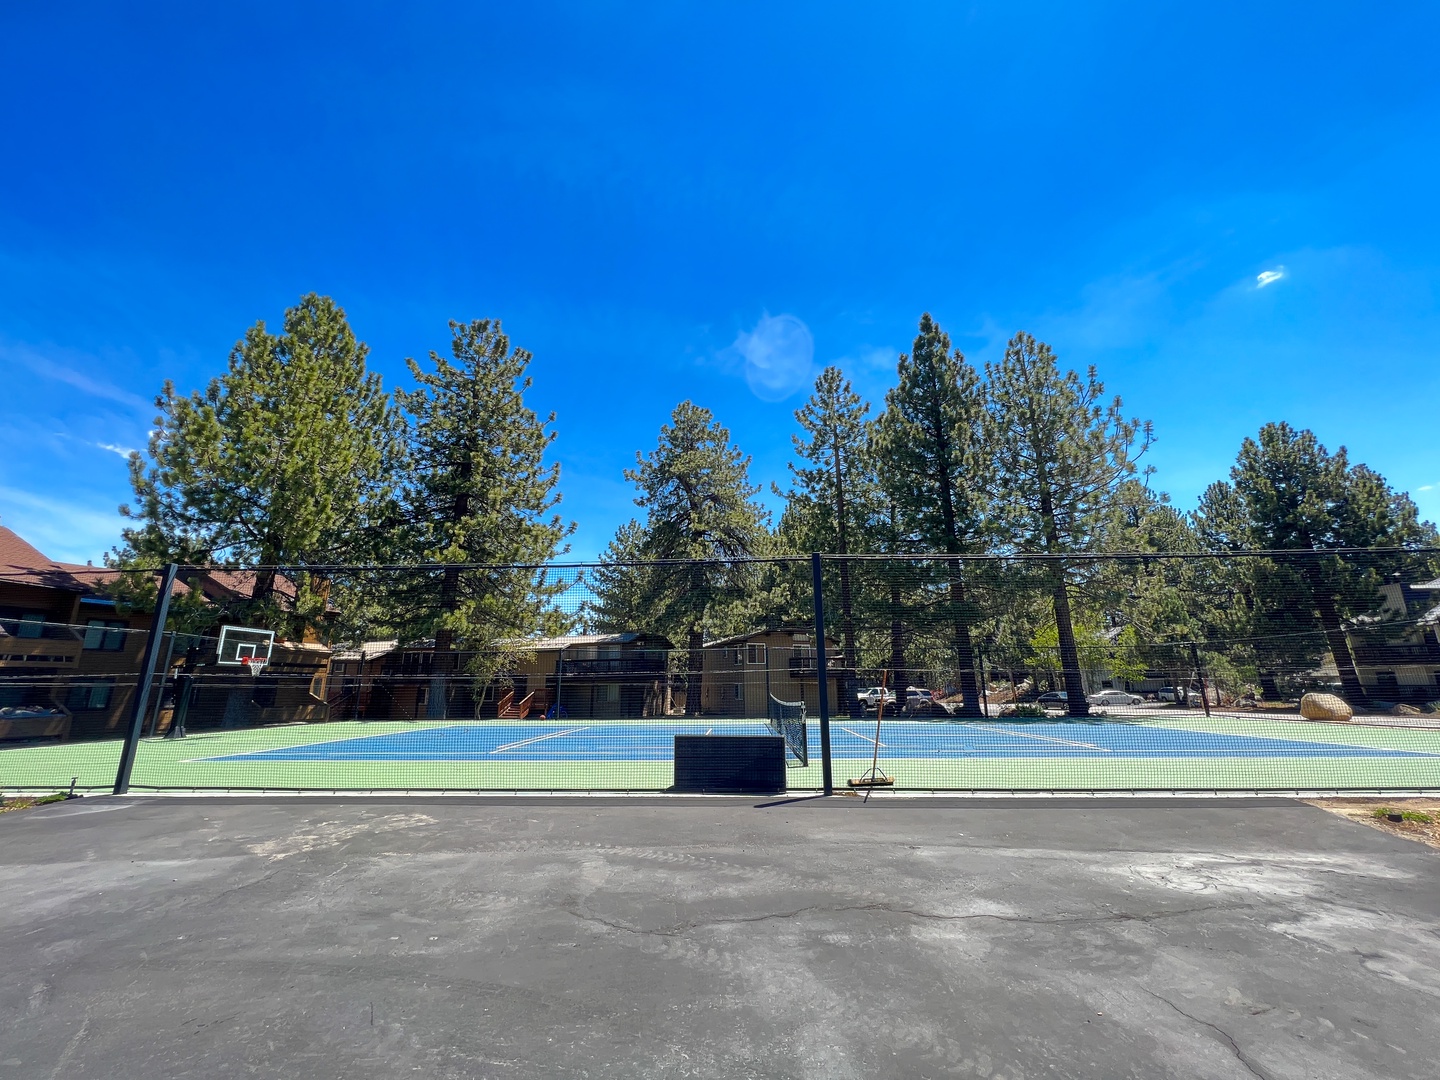 Wildflower complex basketball and tennis courts